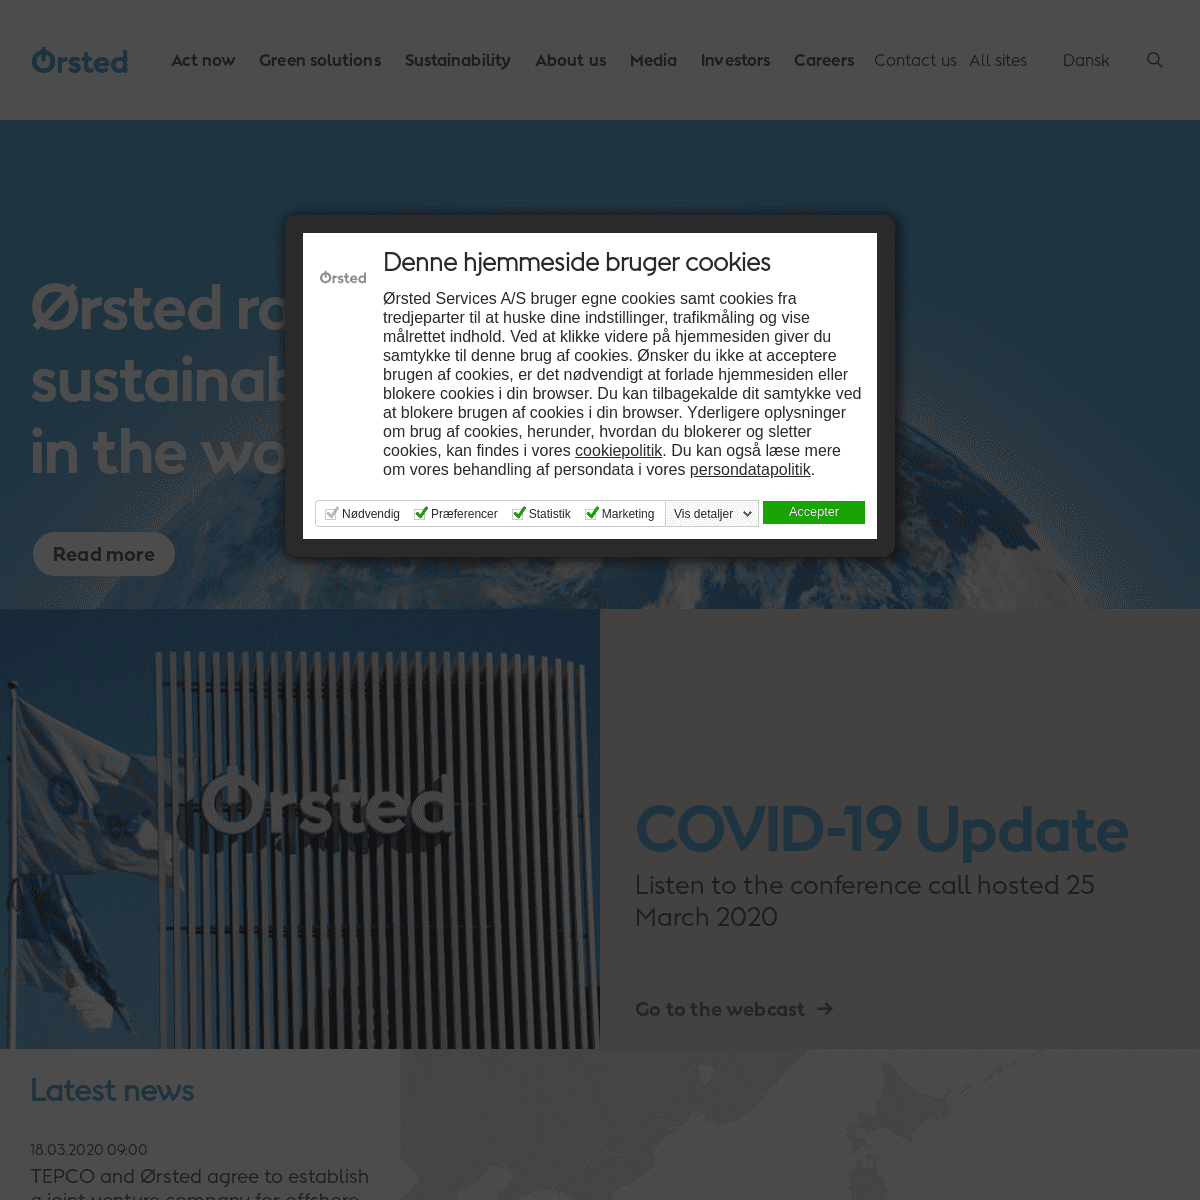 A complete backup of orsted.com